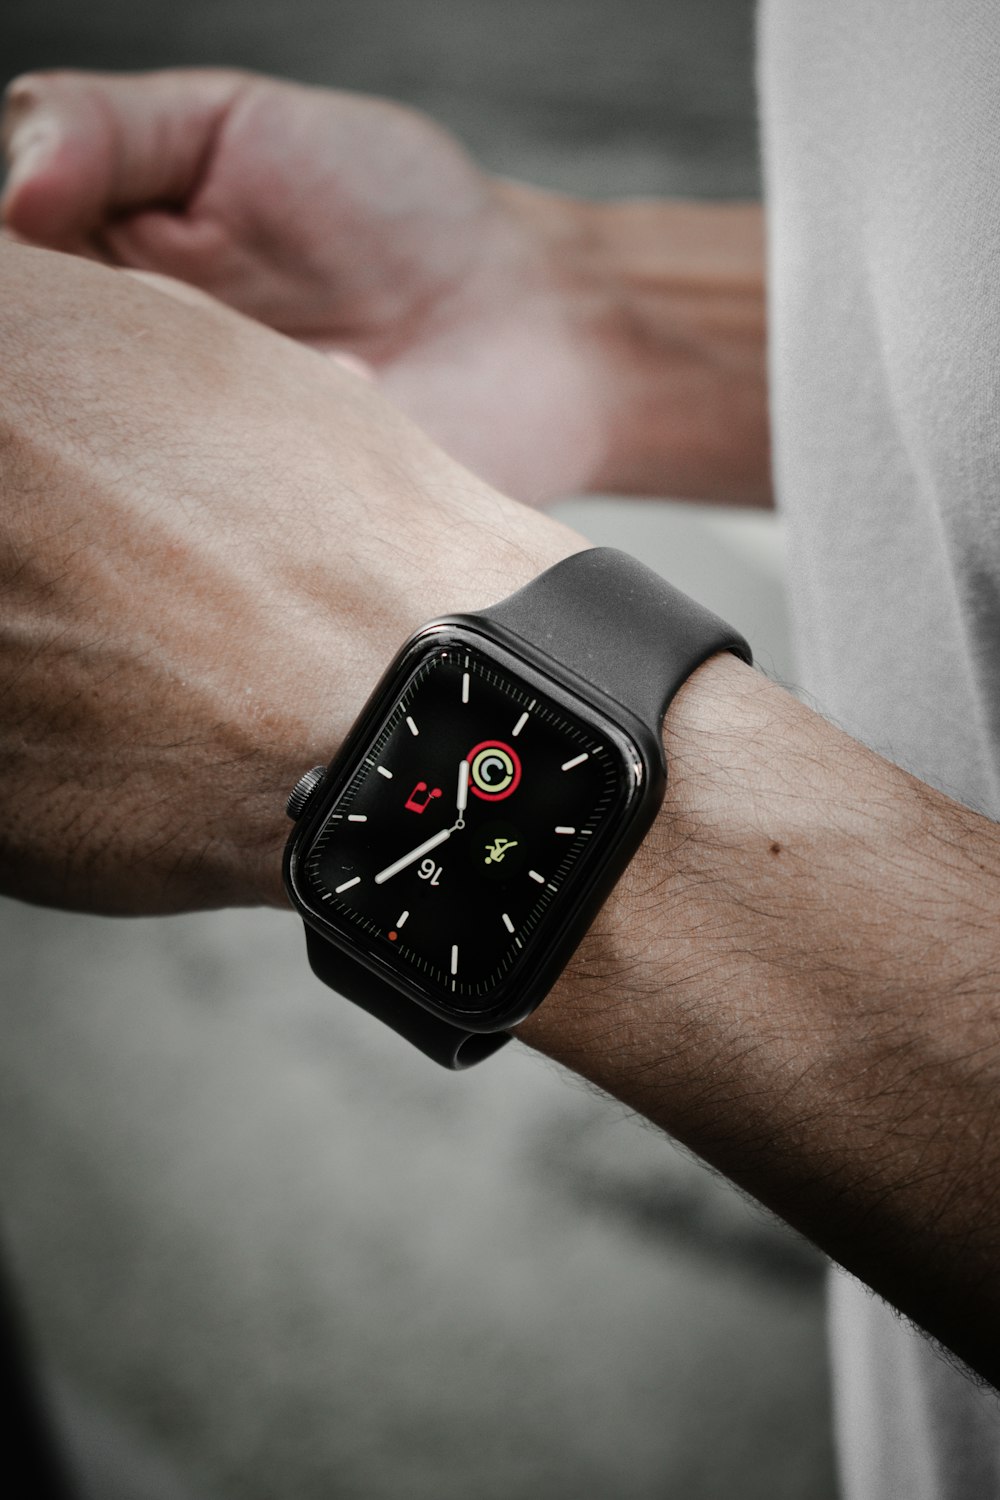 Apple Watch Wallpaper Pictures | Download Free Images on Unsplash